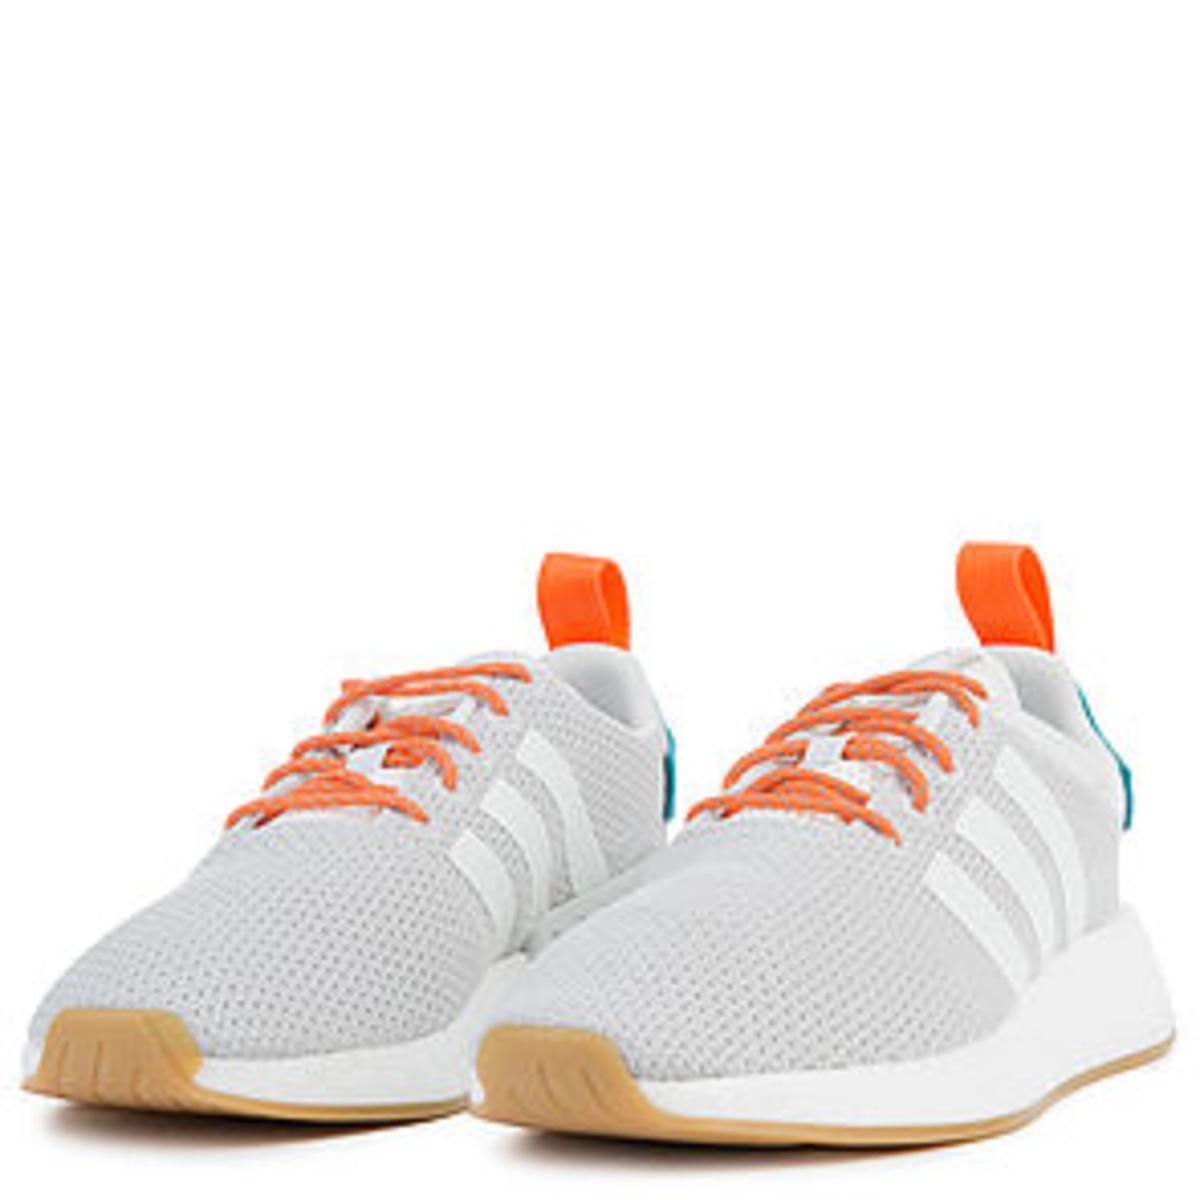 The NMD R2 Summer in White, Grey and Gum3